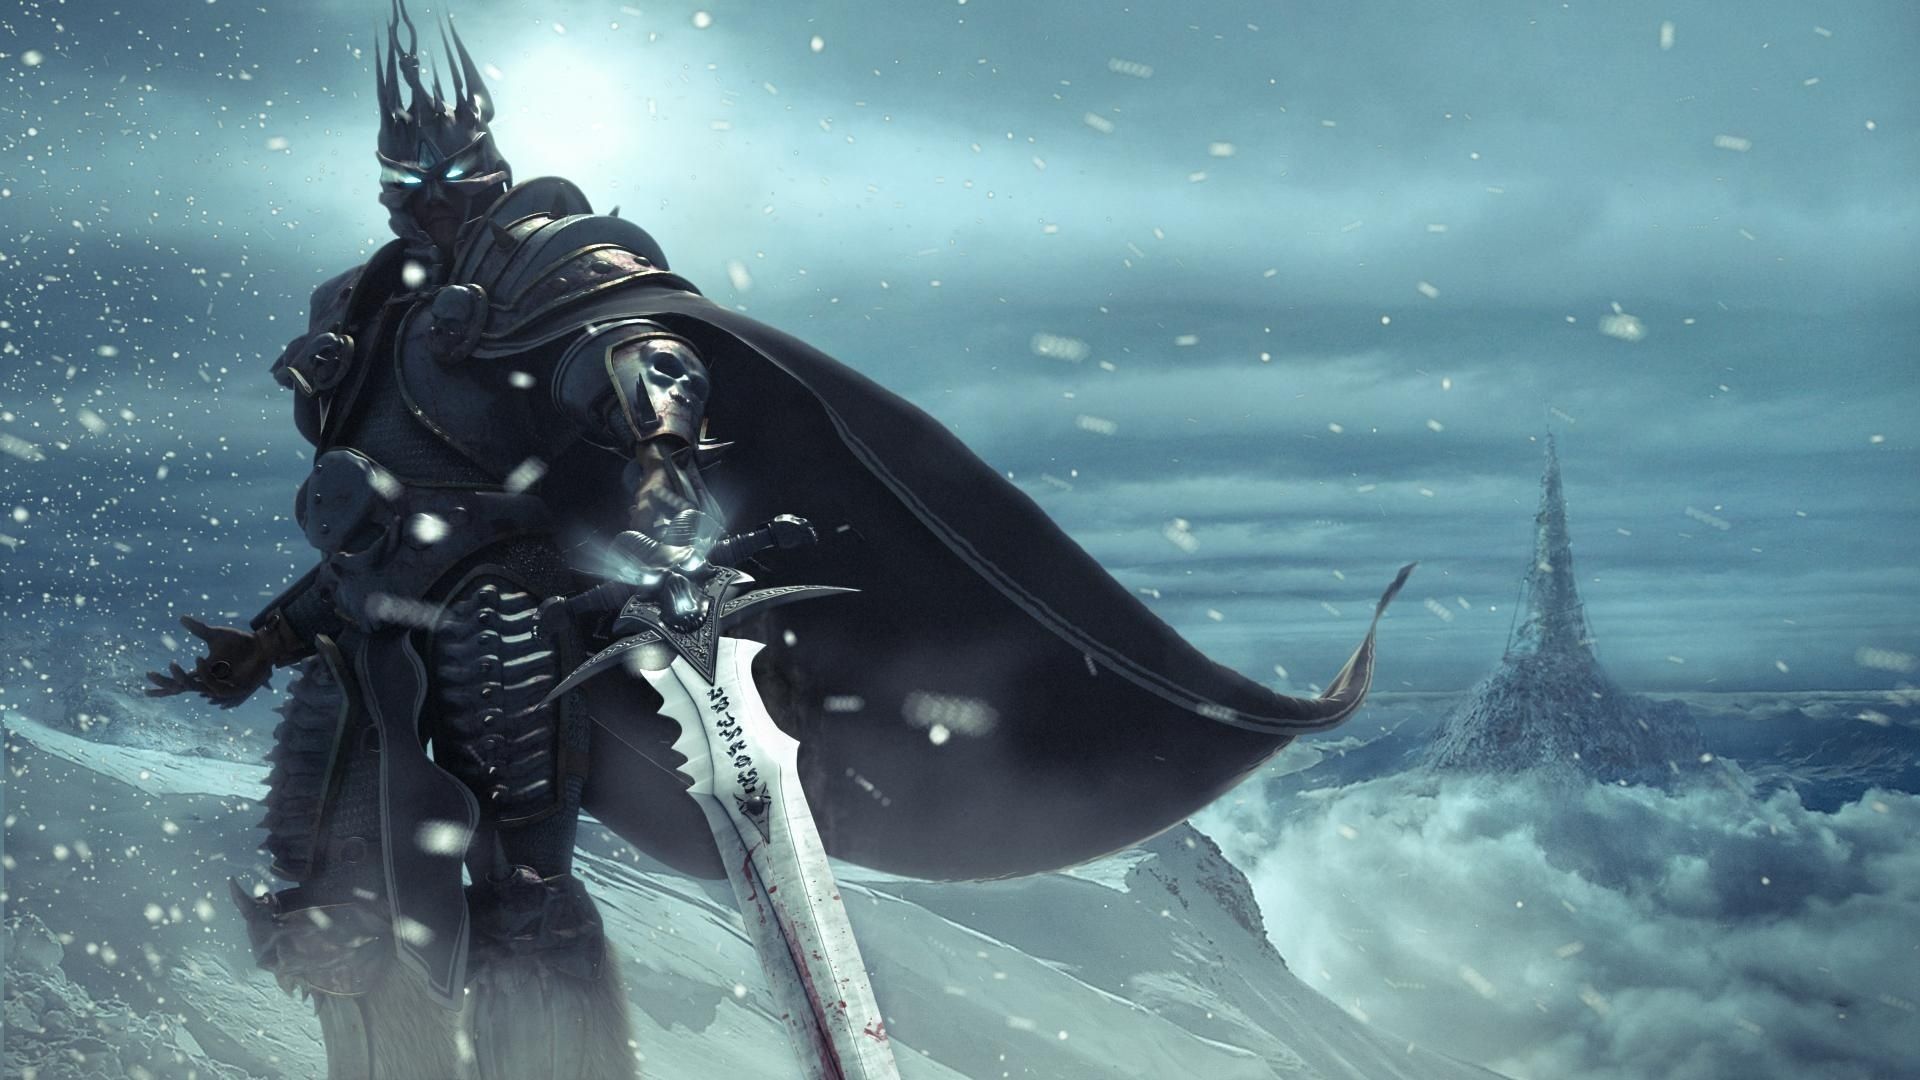 1920x1080 arthas one, world of warcraft, wow, lich king Wallpapers